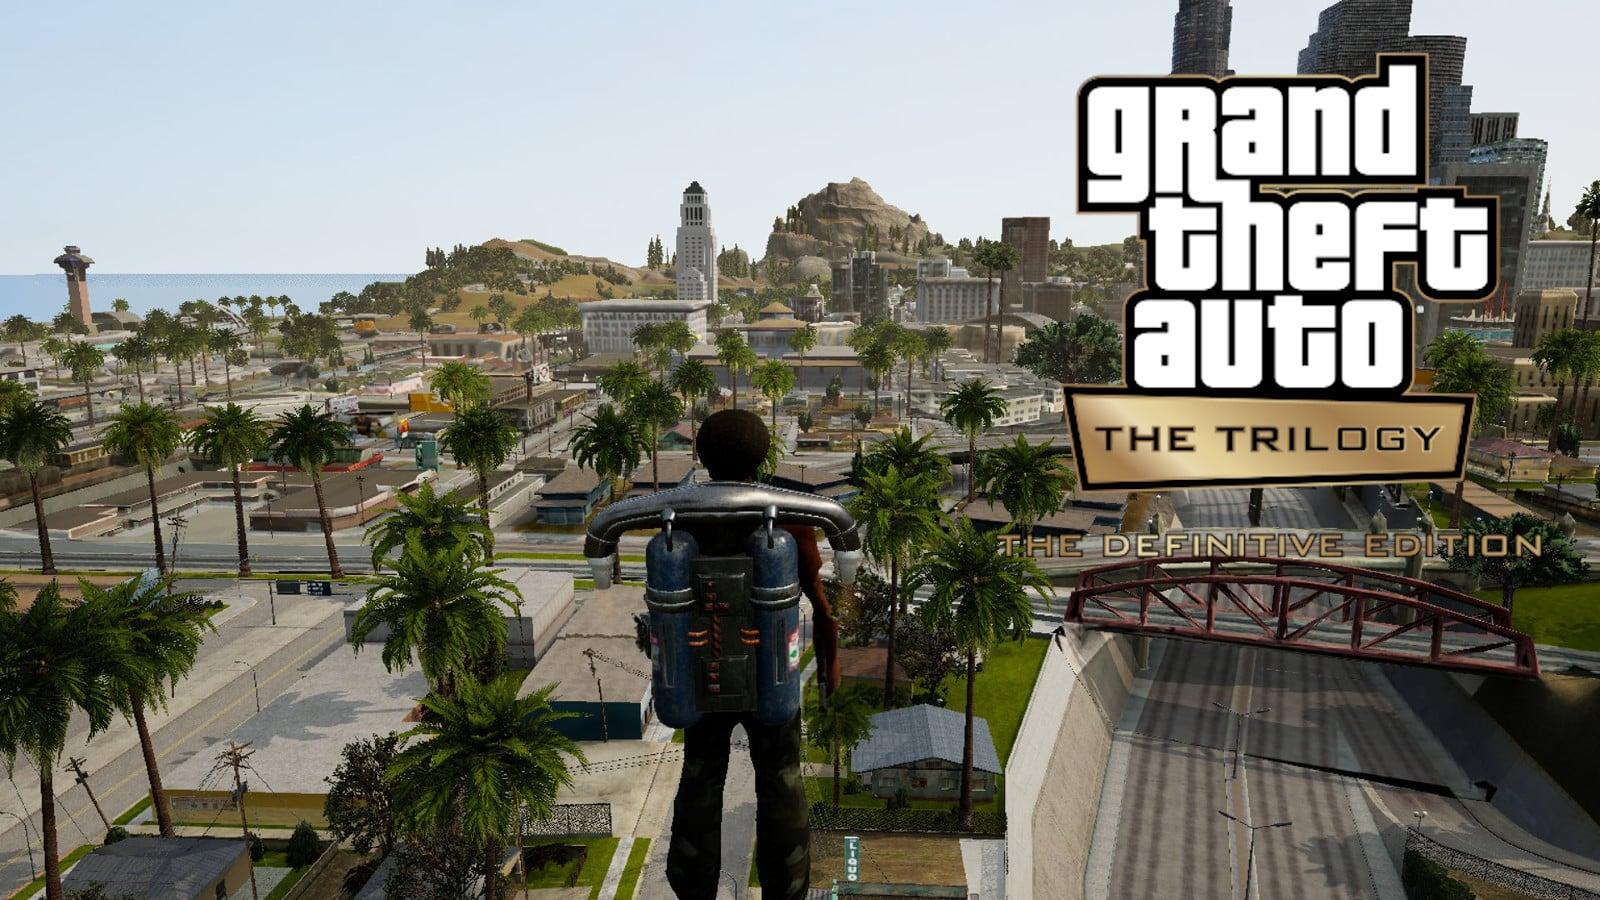 I made Grand Theft Auto: San Andreas wallpaper for phones. It's not perfect  but I hope you like it. https:…